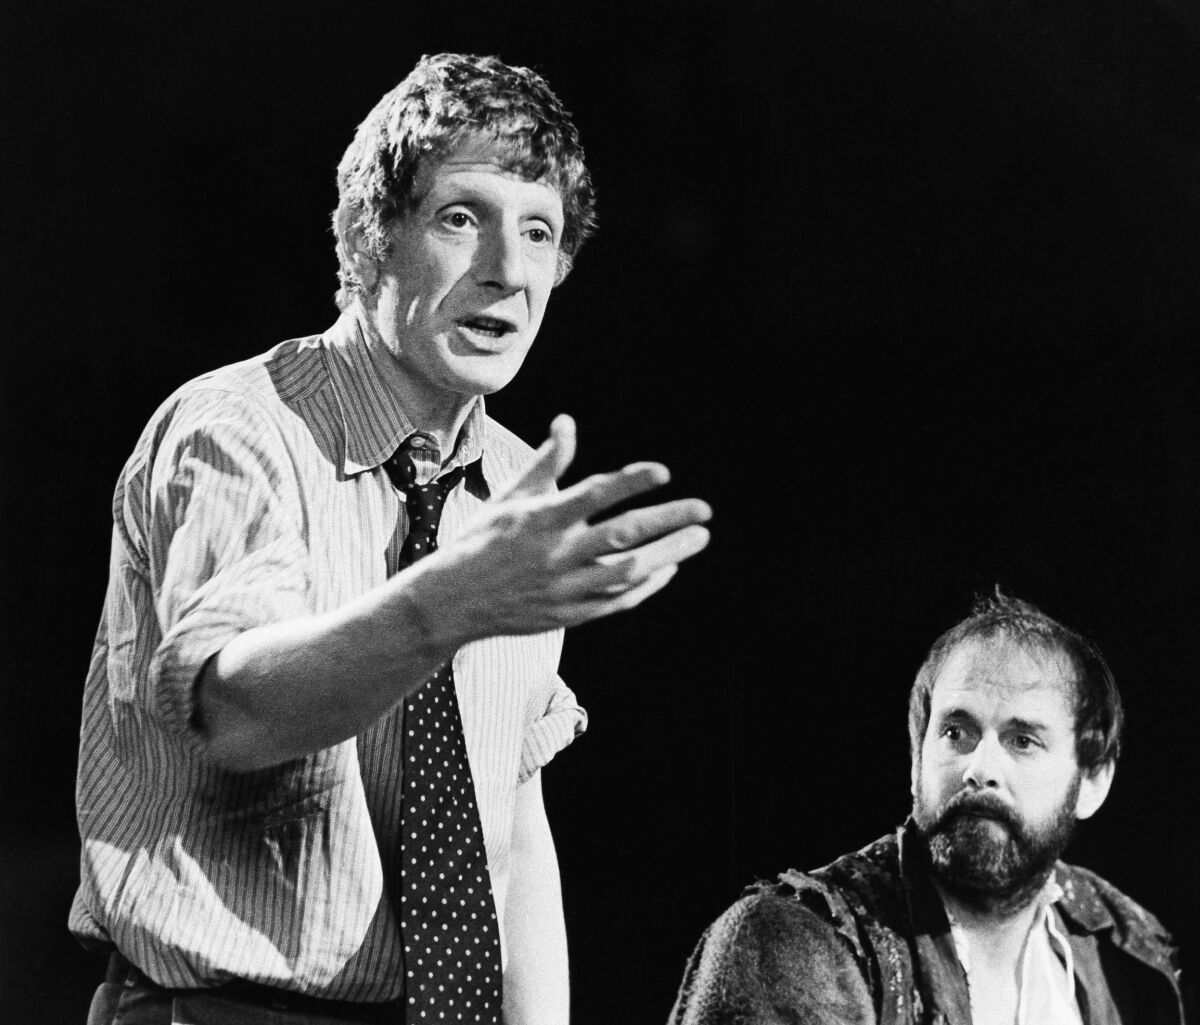  Jonathan Miller, left, directs a 1980 production of Shakespeare's "The Taming of the Shrew" with actor John Cleese, right.